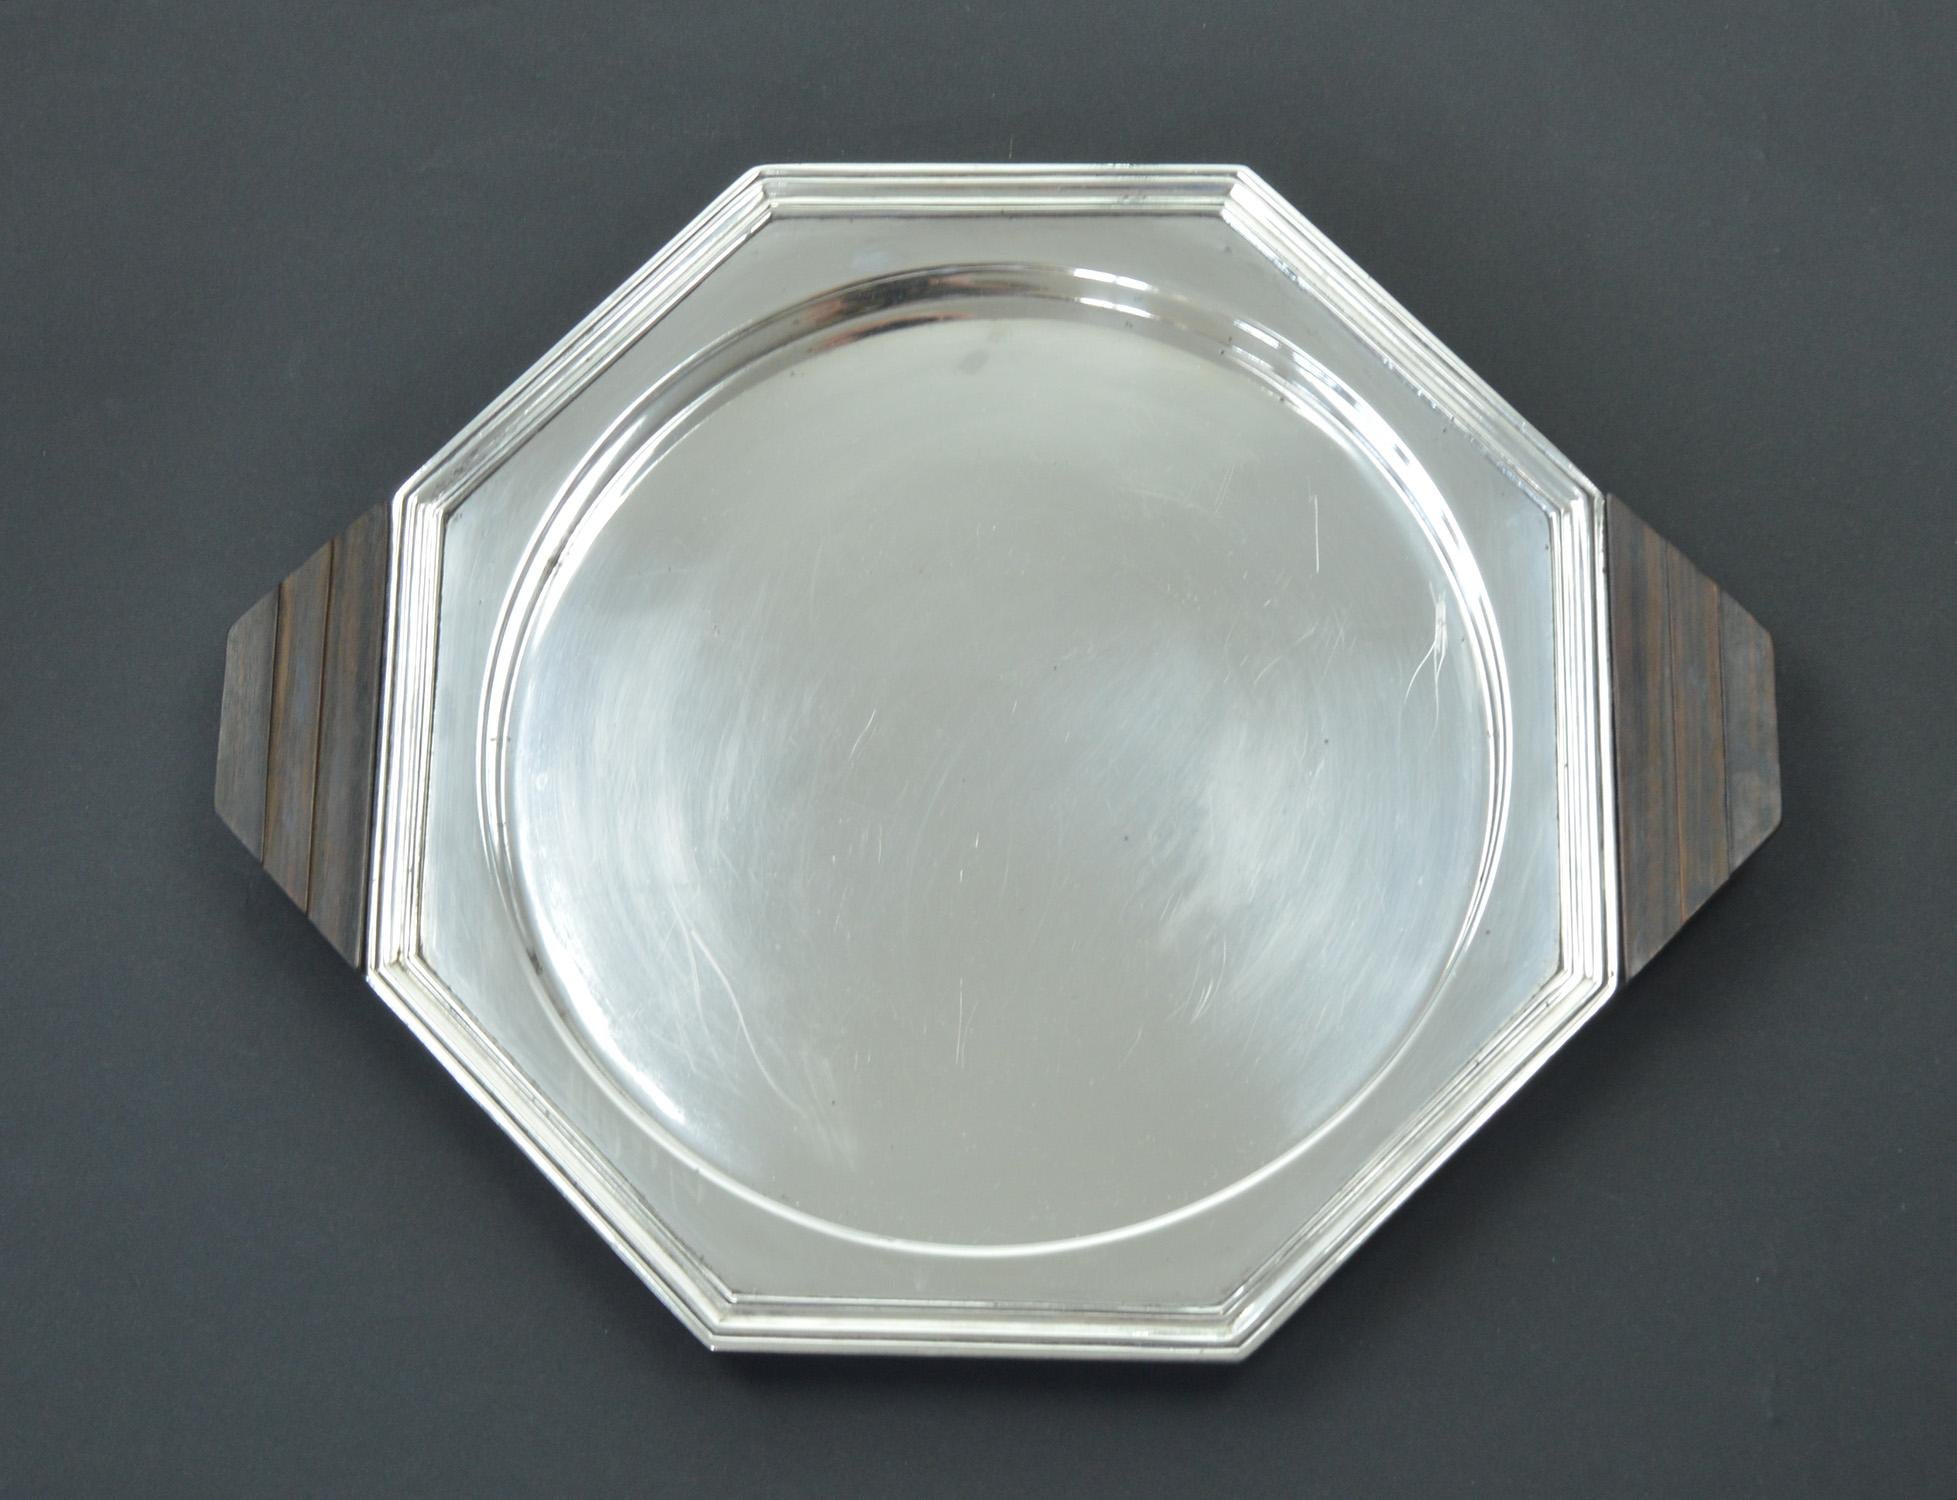 Italian Art Deco Modernist Style Silver Plated Tray